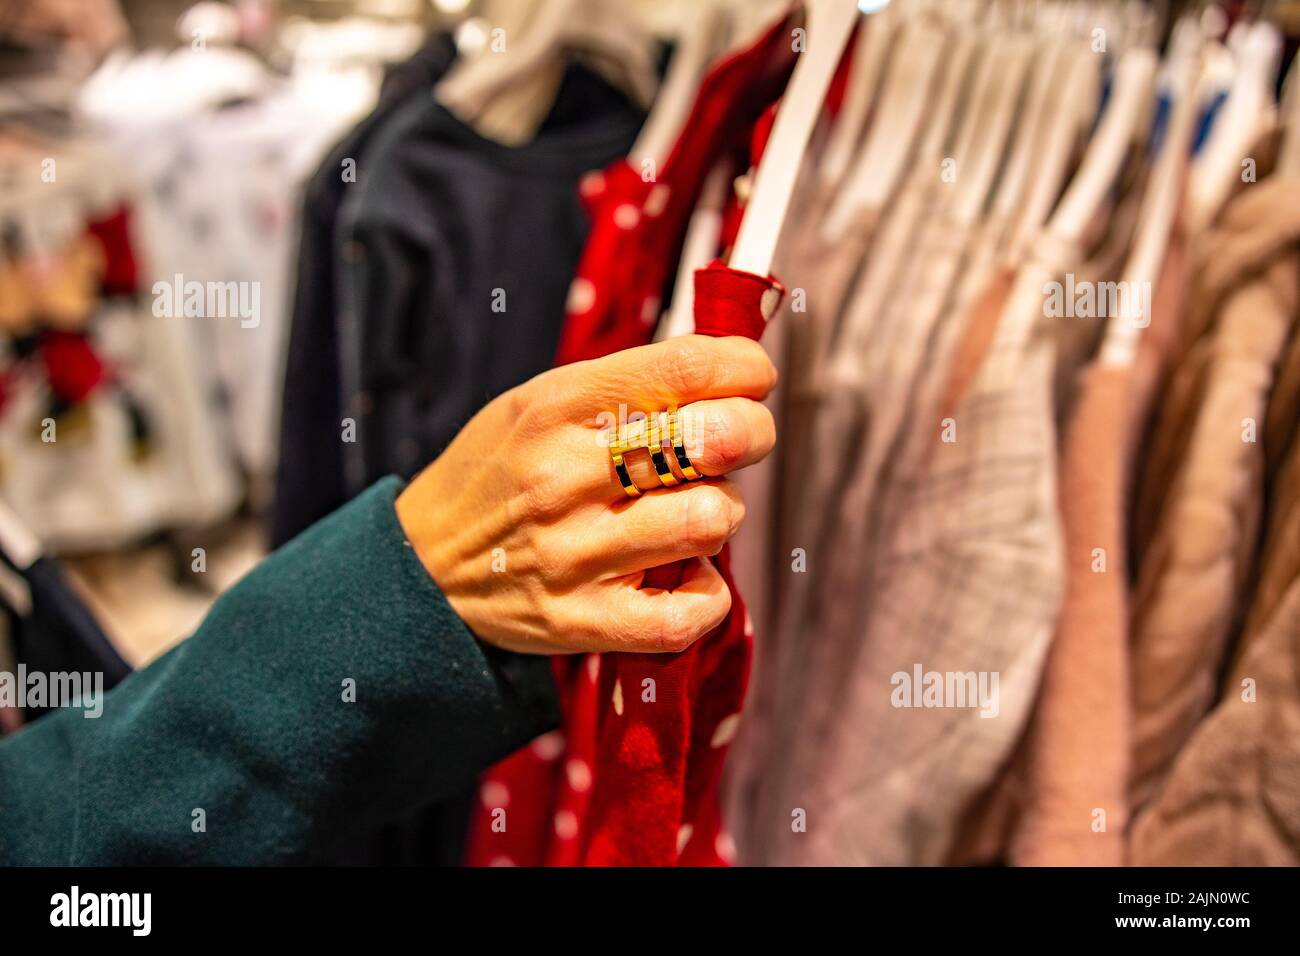 Modern woman shopping in fashion mall, choosing new clothes, looking through hangers with different casual colorful garments on hangers Stock Photo